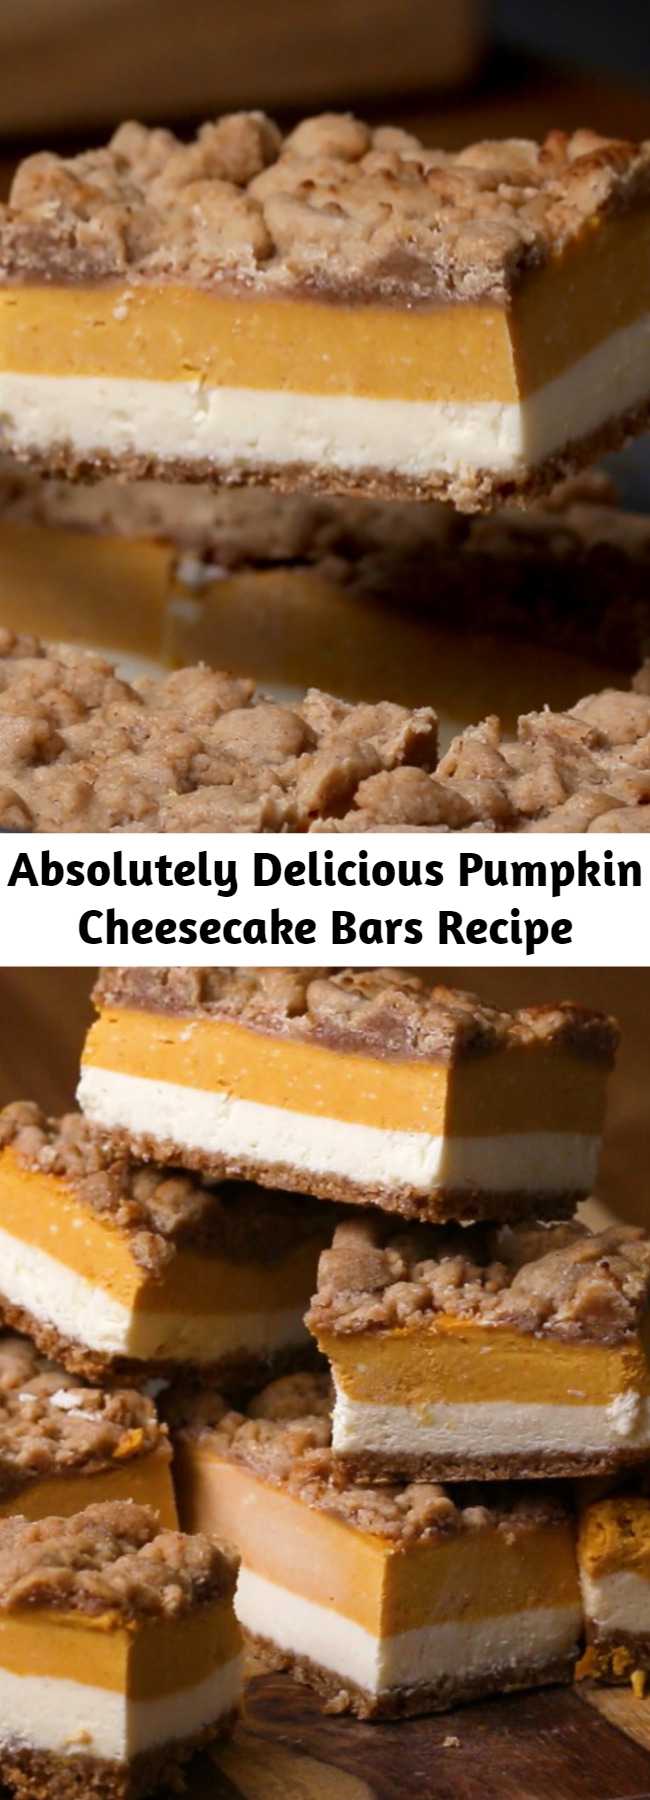 Absolutely Delicious Pumpkin Cheesecake Bars Recipe - Will make for a super tasty sweet treat during the fall and holiday season. This perfect Pumpkin Cheesecake Bars is delicious and very good! Perfect Thanksgiving Dessert! #pumpkin #cheesecake #fall #fall #recipe